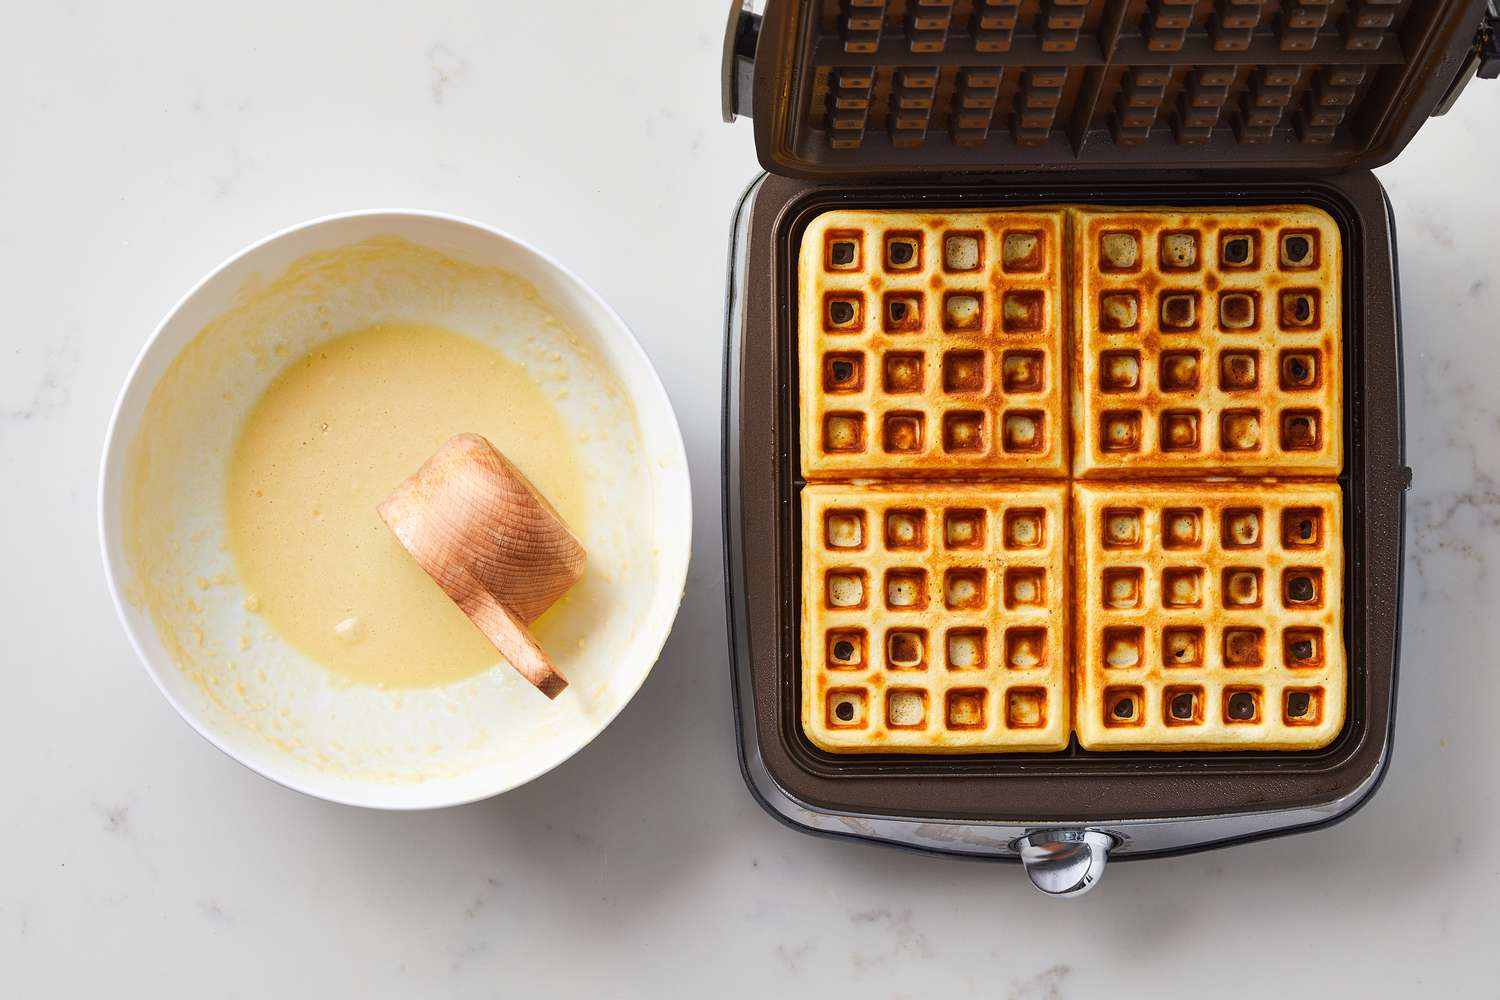 How To Make Waffle In A Waffle Iron